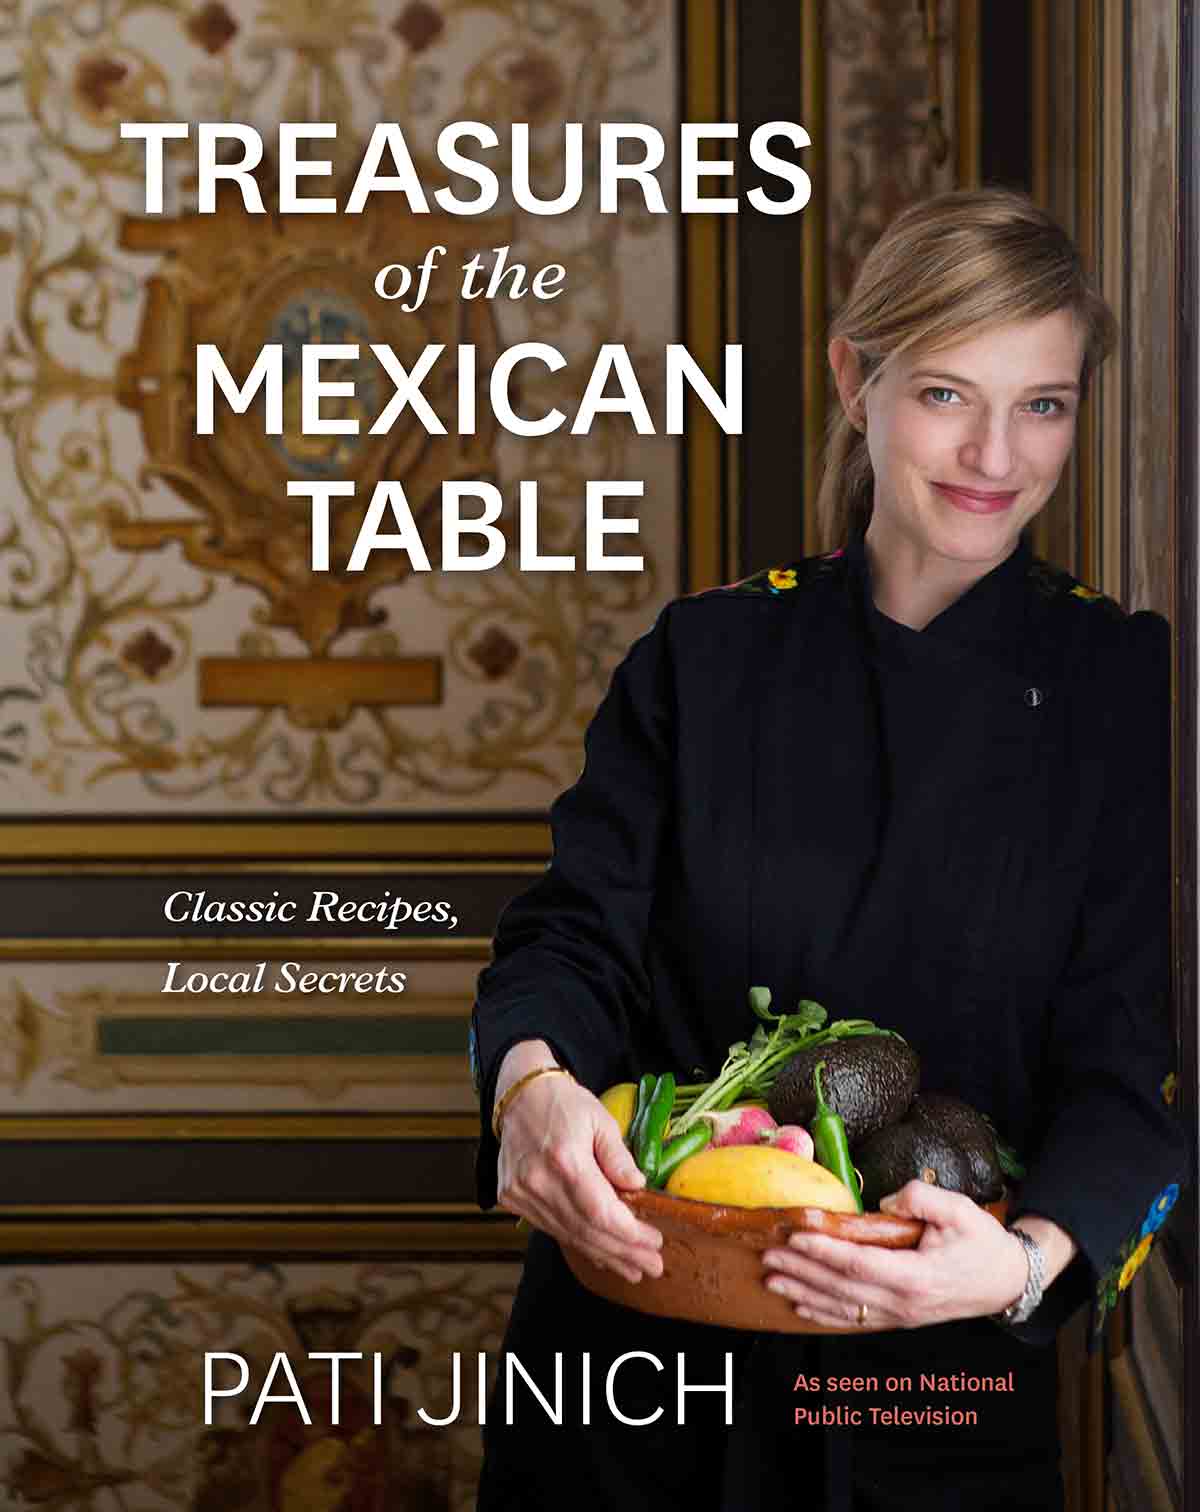 Treasure of the Mexican Table